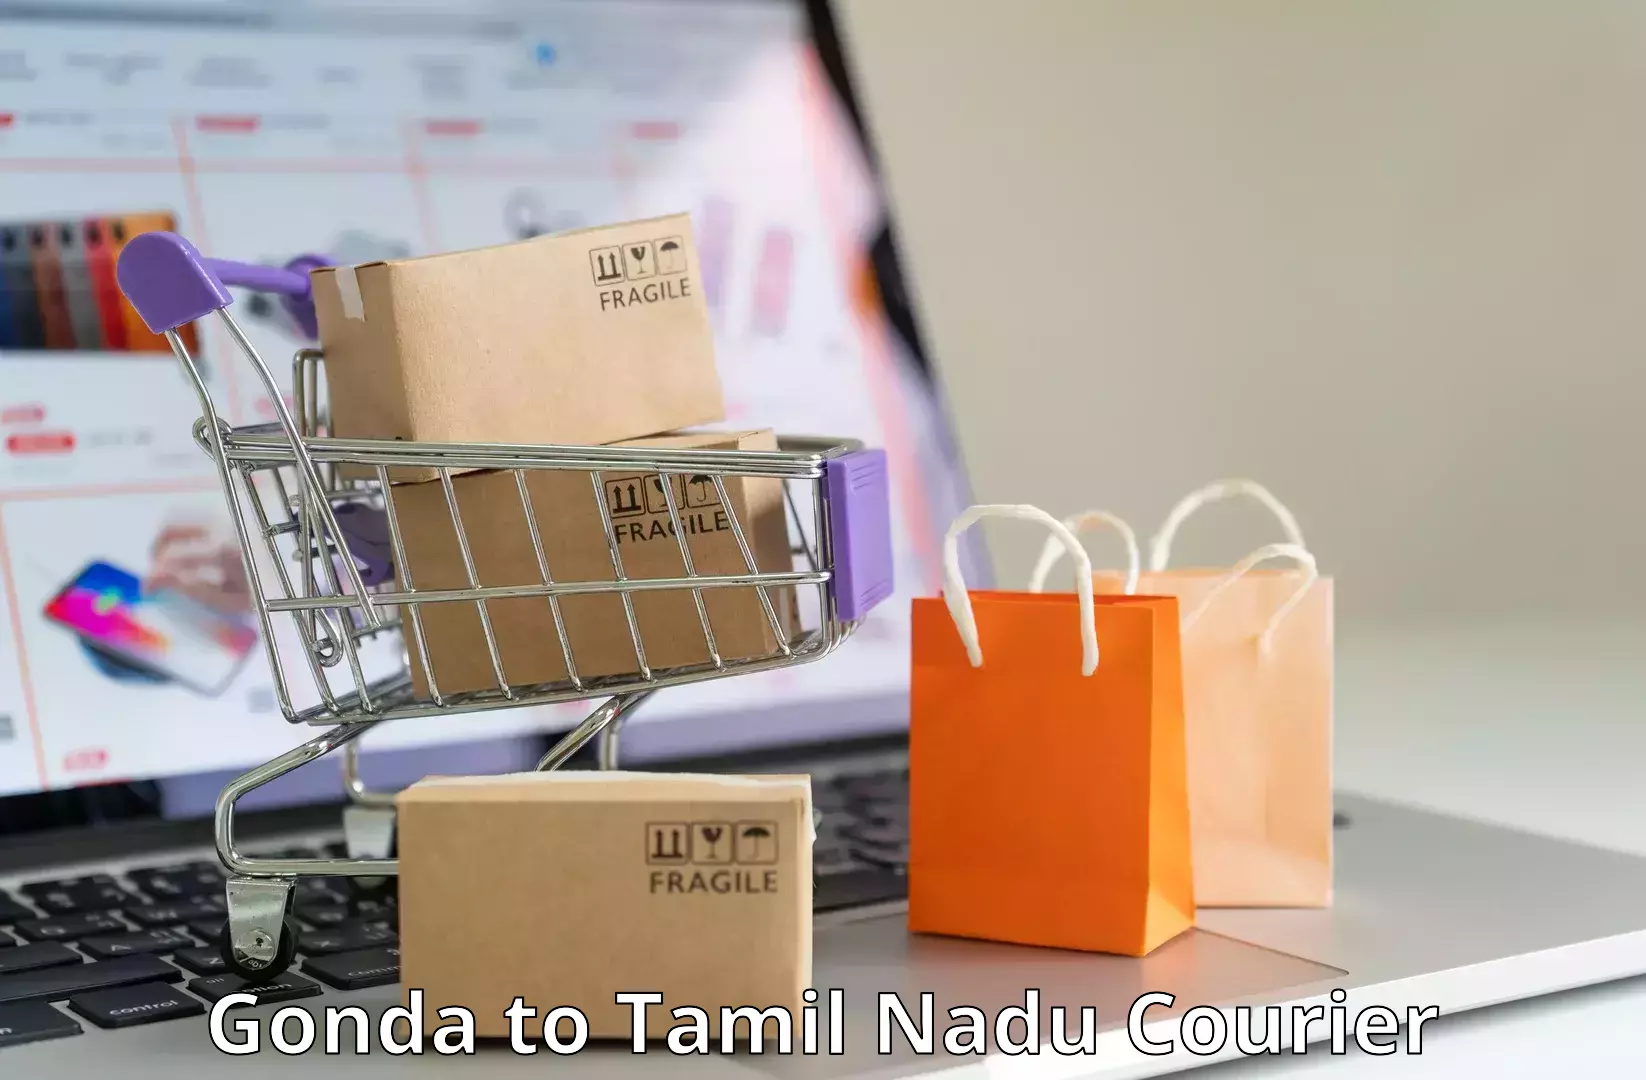 Sustainable delivery practices in Gonda to Tirupur